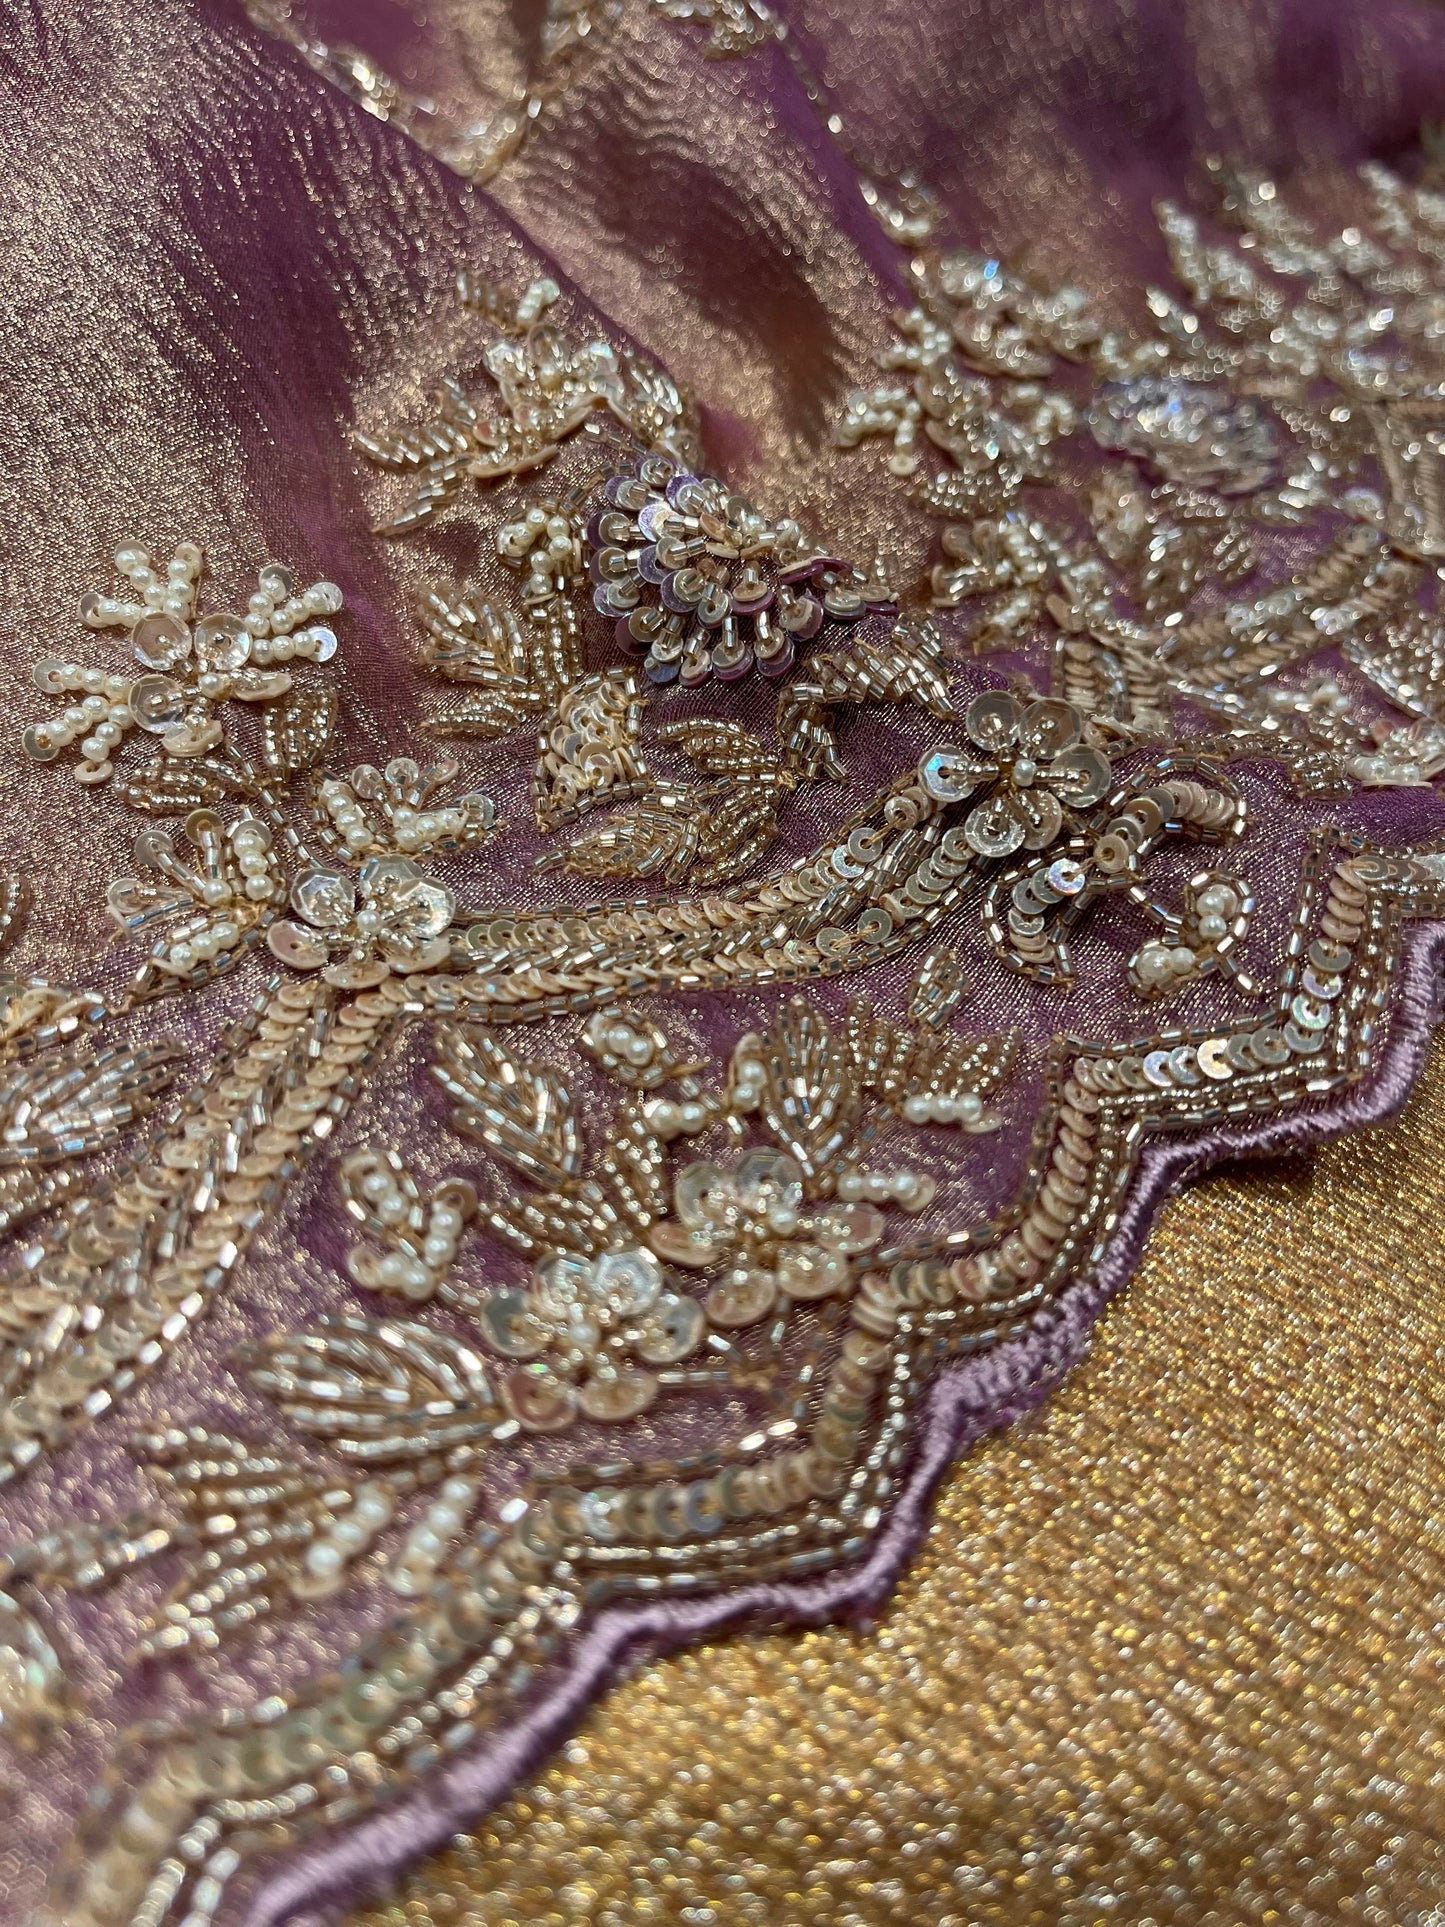 PURPLE COLOUR CRUSHED TISSUE EMBROIDERED SAREE EMBELLISHED WITH CUTDANA & SEQUINS WORK